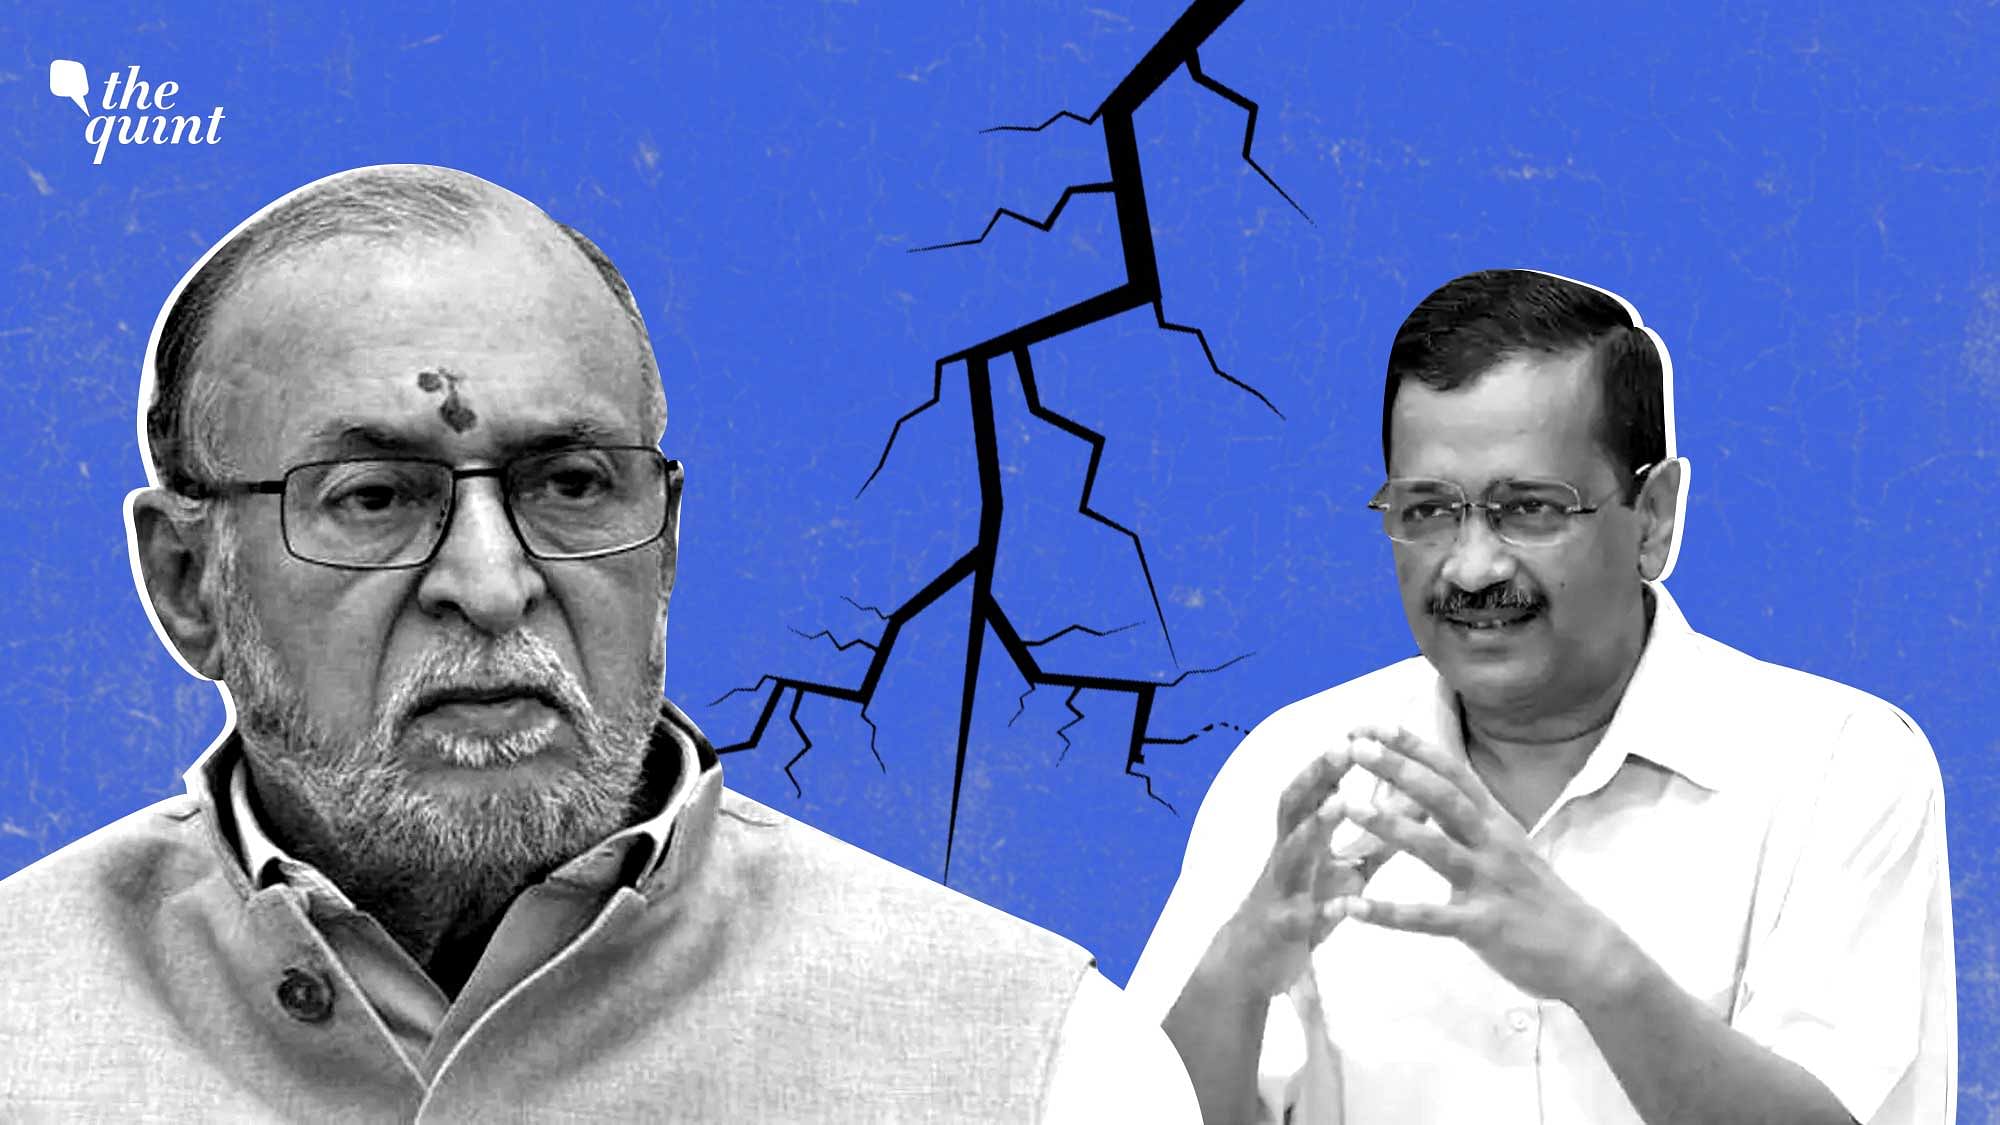 <div class="paragraphs"><p>Over five years after <a href="https://www.thequint.com/topic/anil-baijal">Anil Baijal</a> took over as the Lieutant Governor of Delhi, he submitted his <a href="https://www.thequint.com/news/politics/delhi-lieutenant-governor-anil-baijal-resigns">resignation</a> to President Ramnath Kovind on 18 May, and cited "personal reasons" behind the step.</p></div>